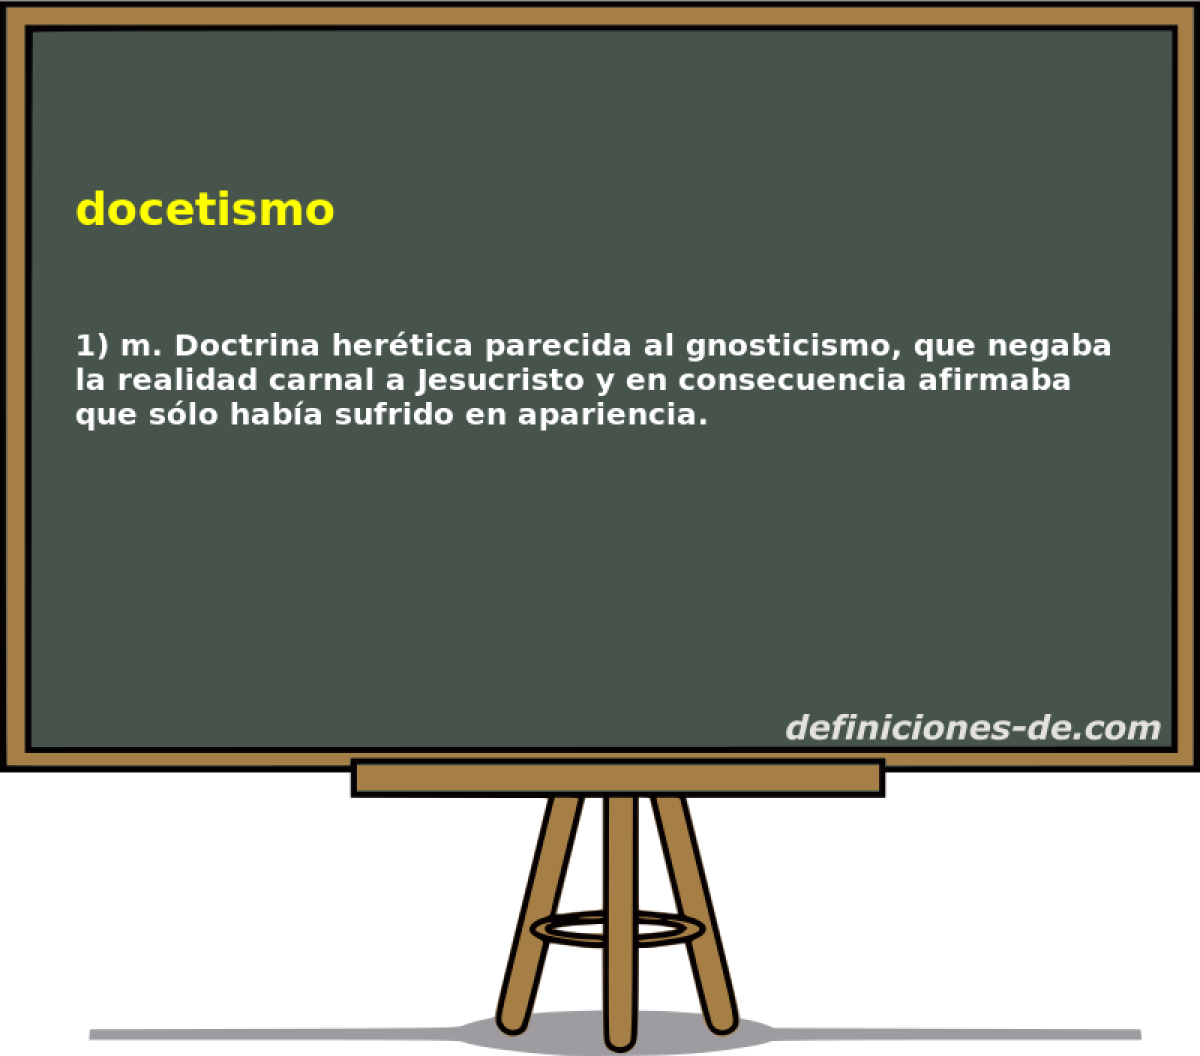 docetismo 